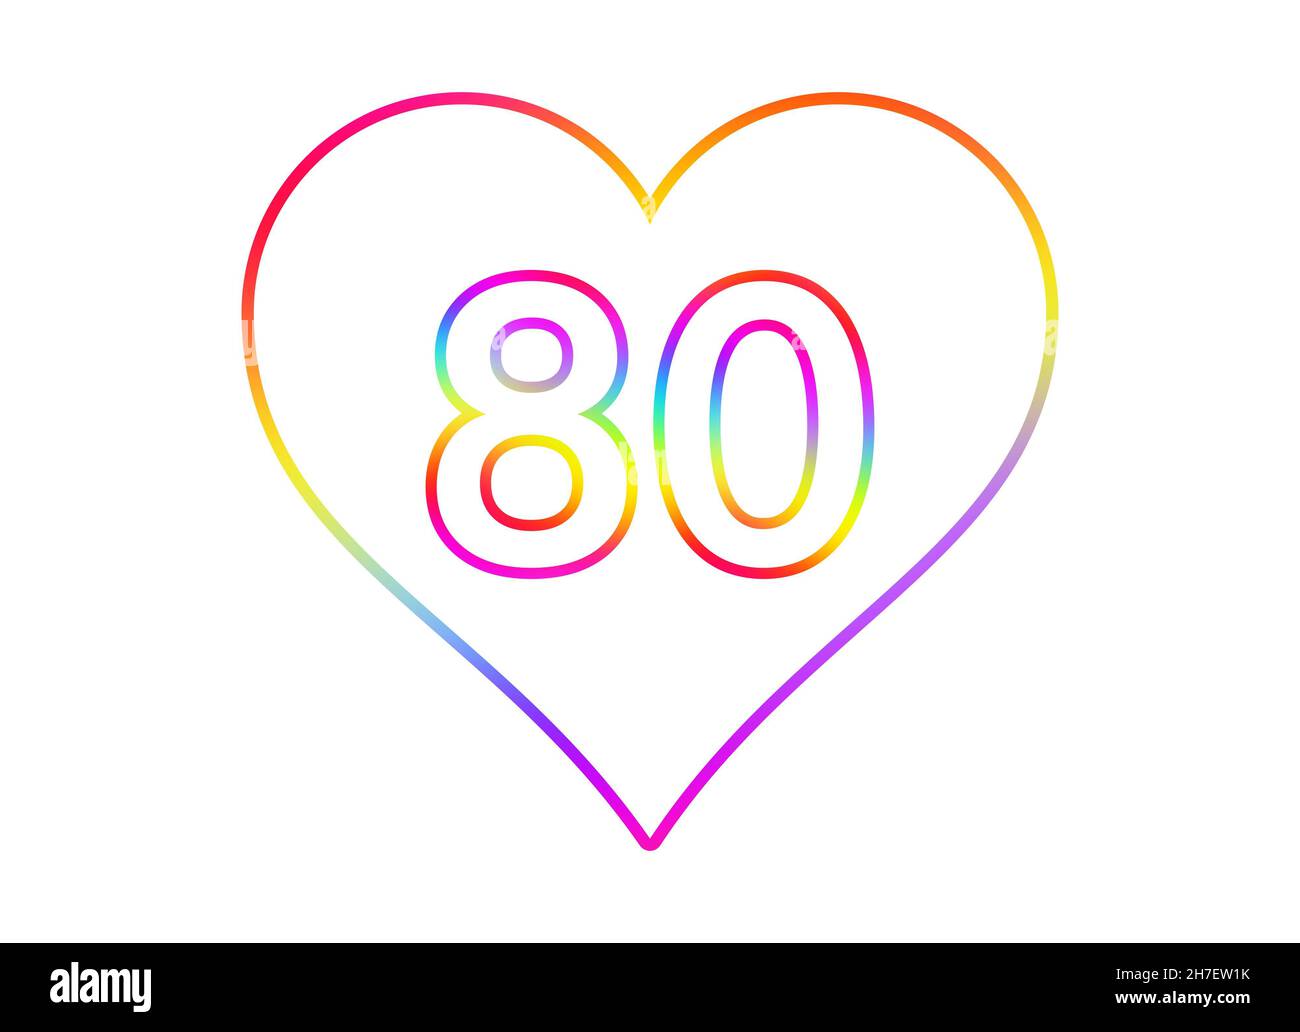 Number 80 into a white heart with rainbow color outline. Stock Photo